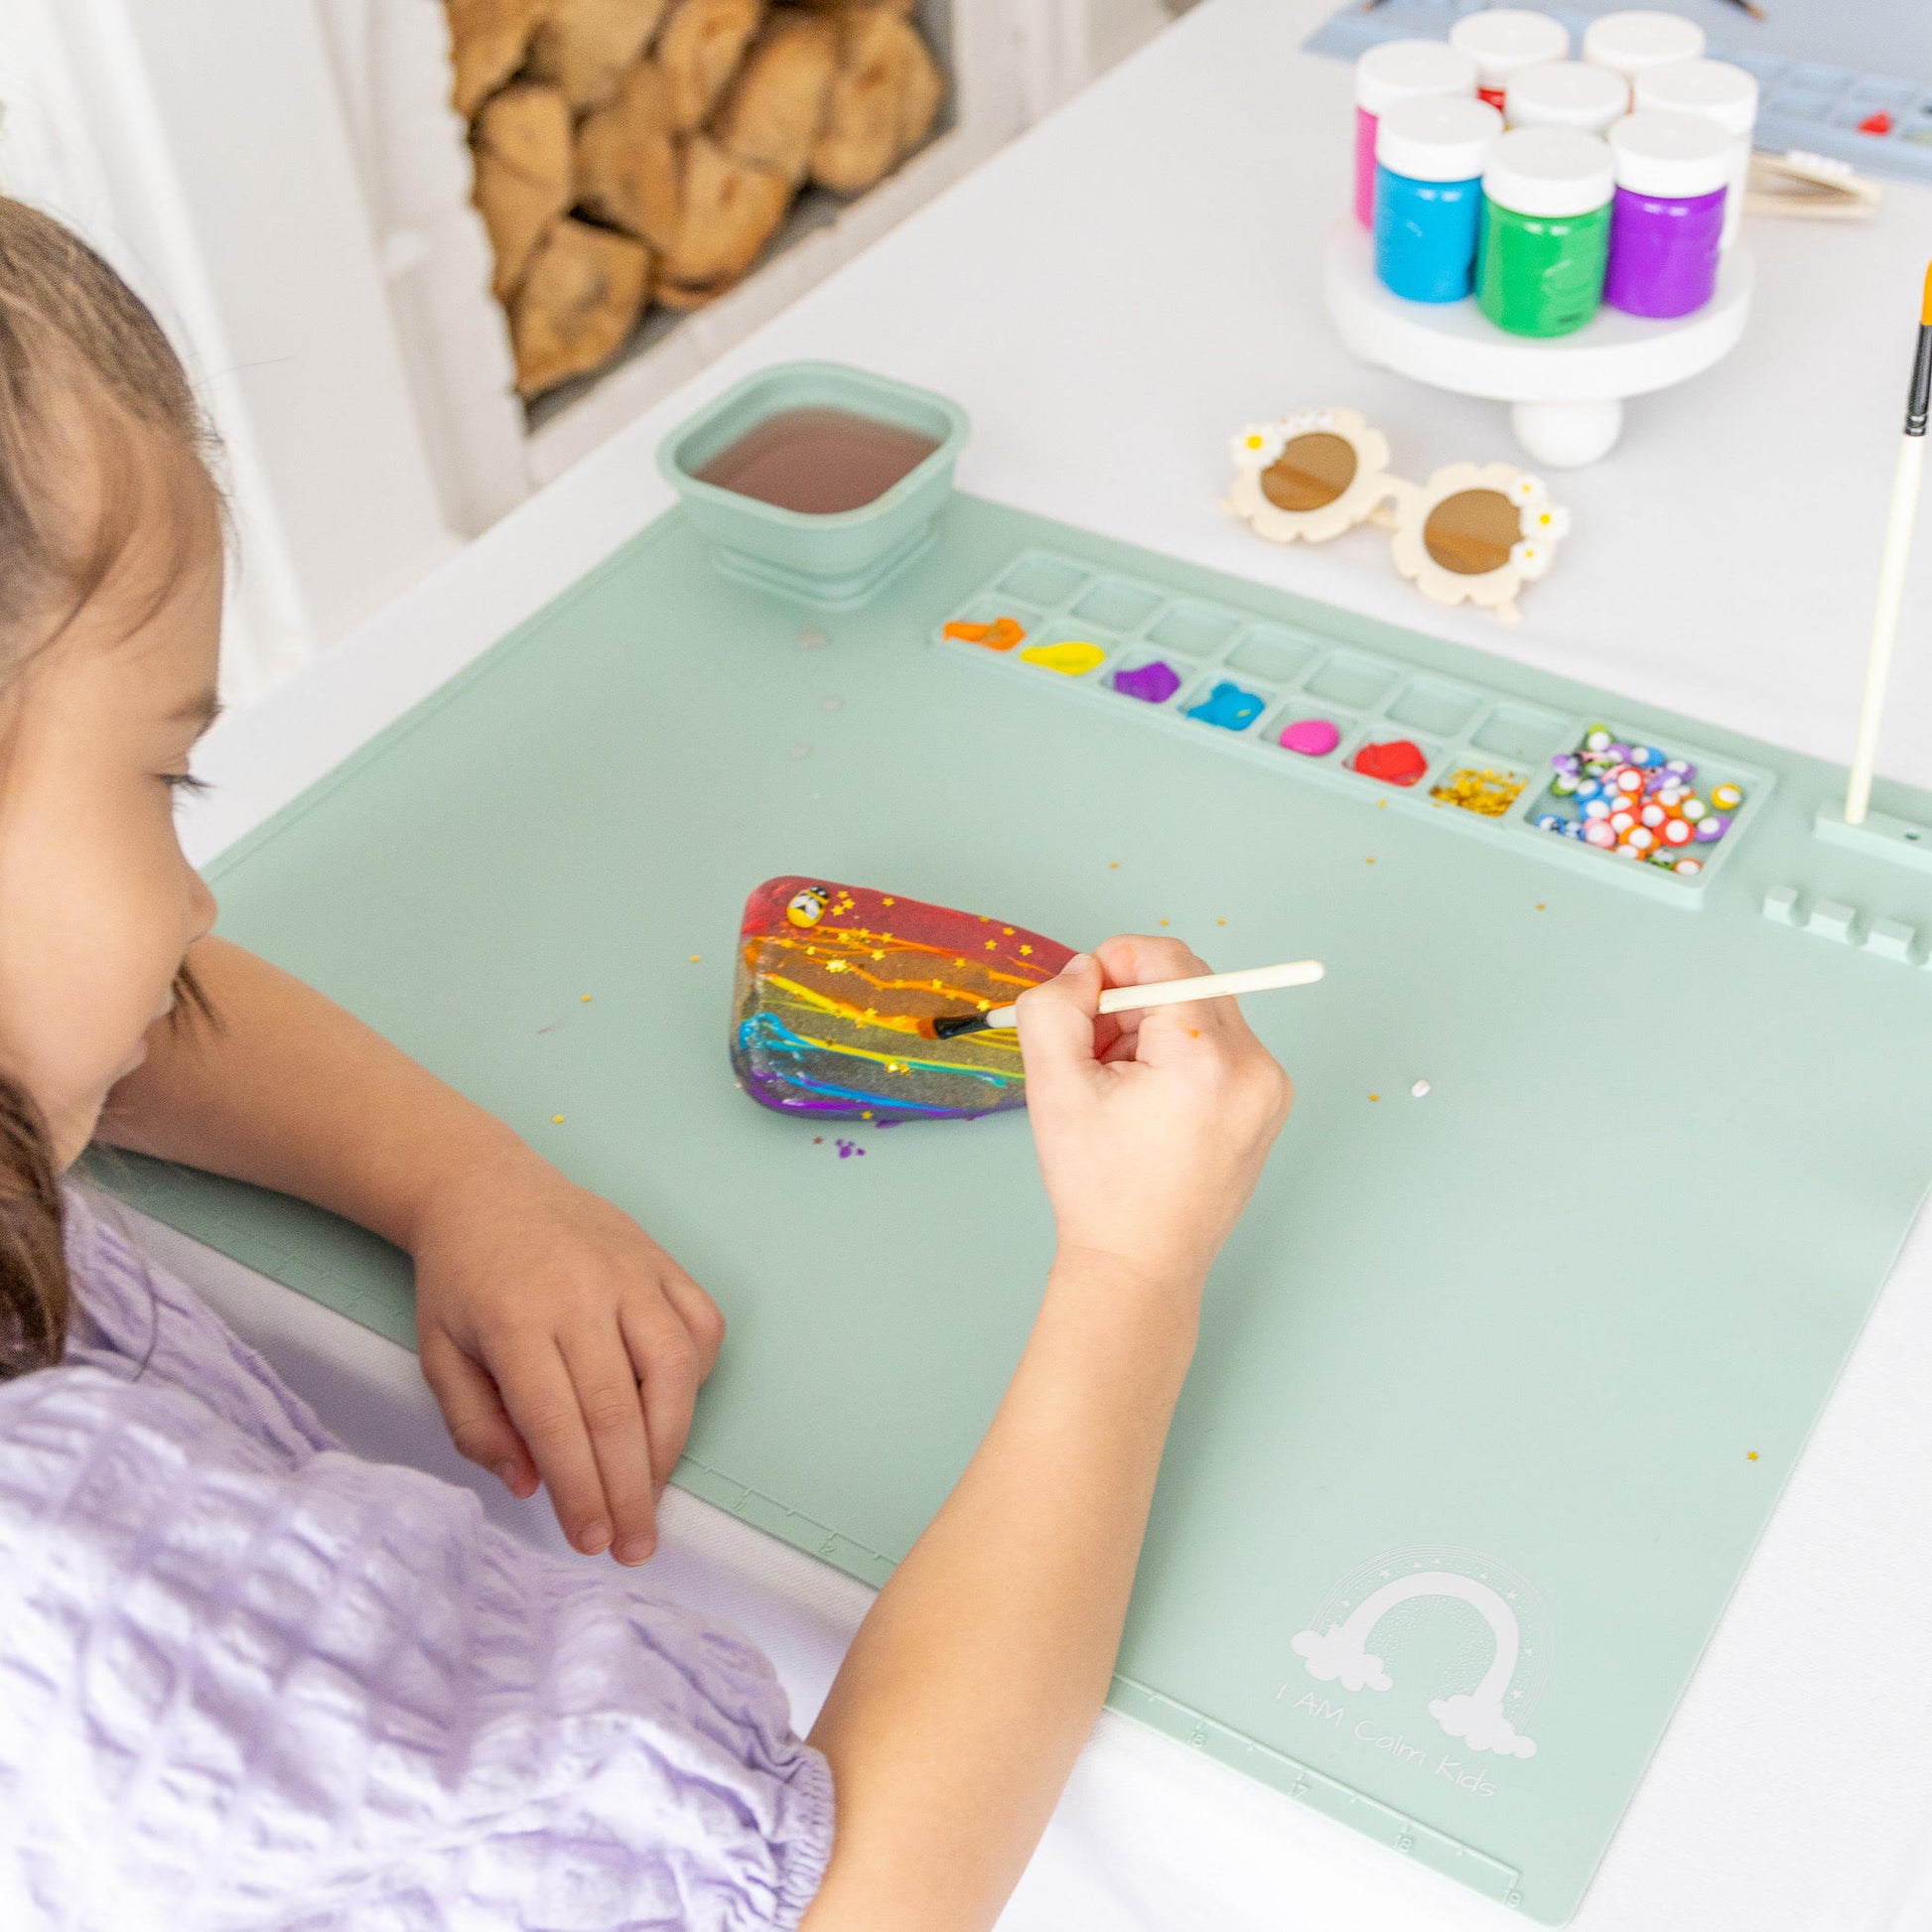 Elatam Creations Blue Silicone Painting Mat for Kids (Ages 4-12